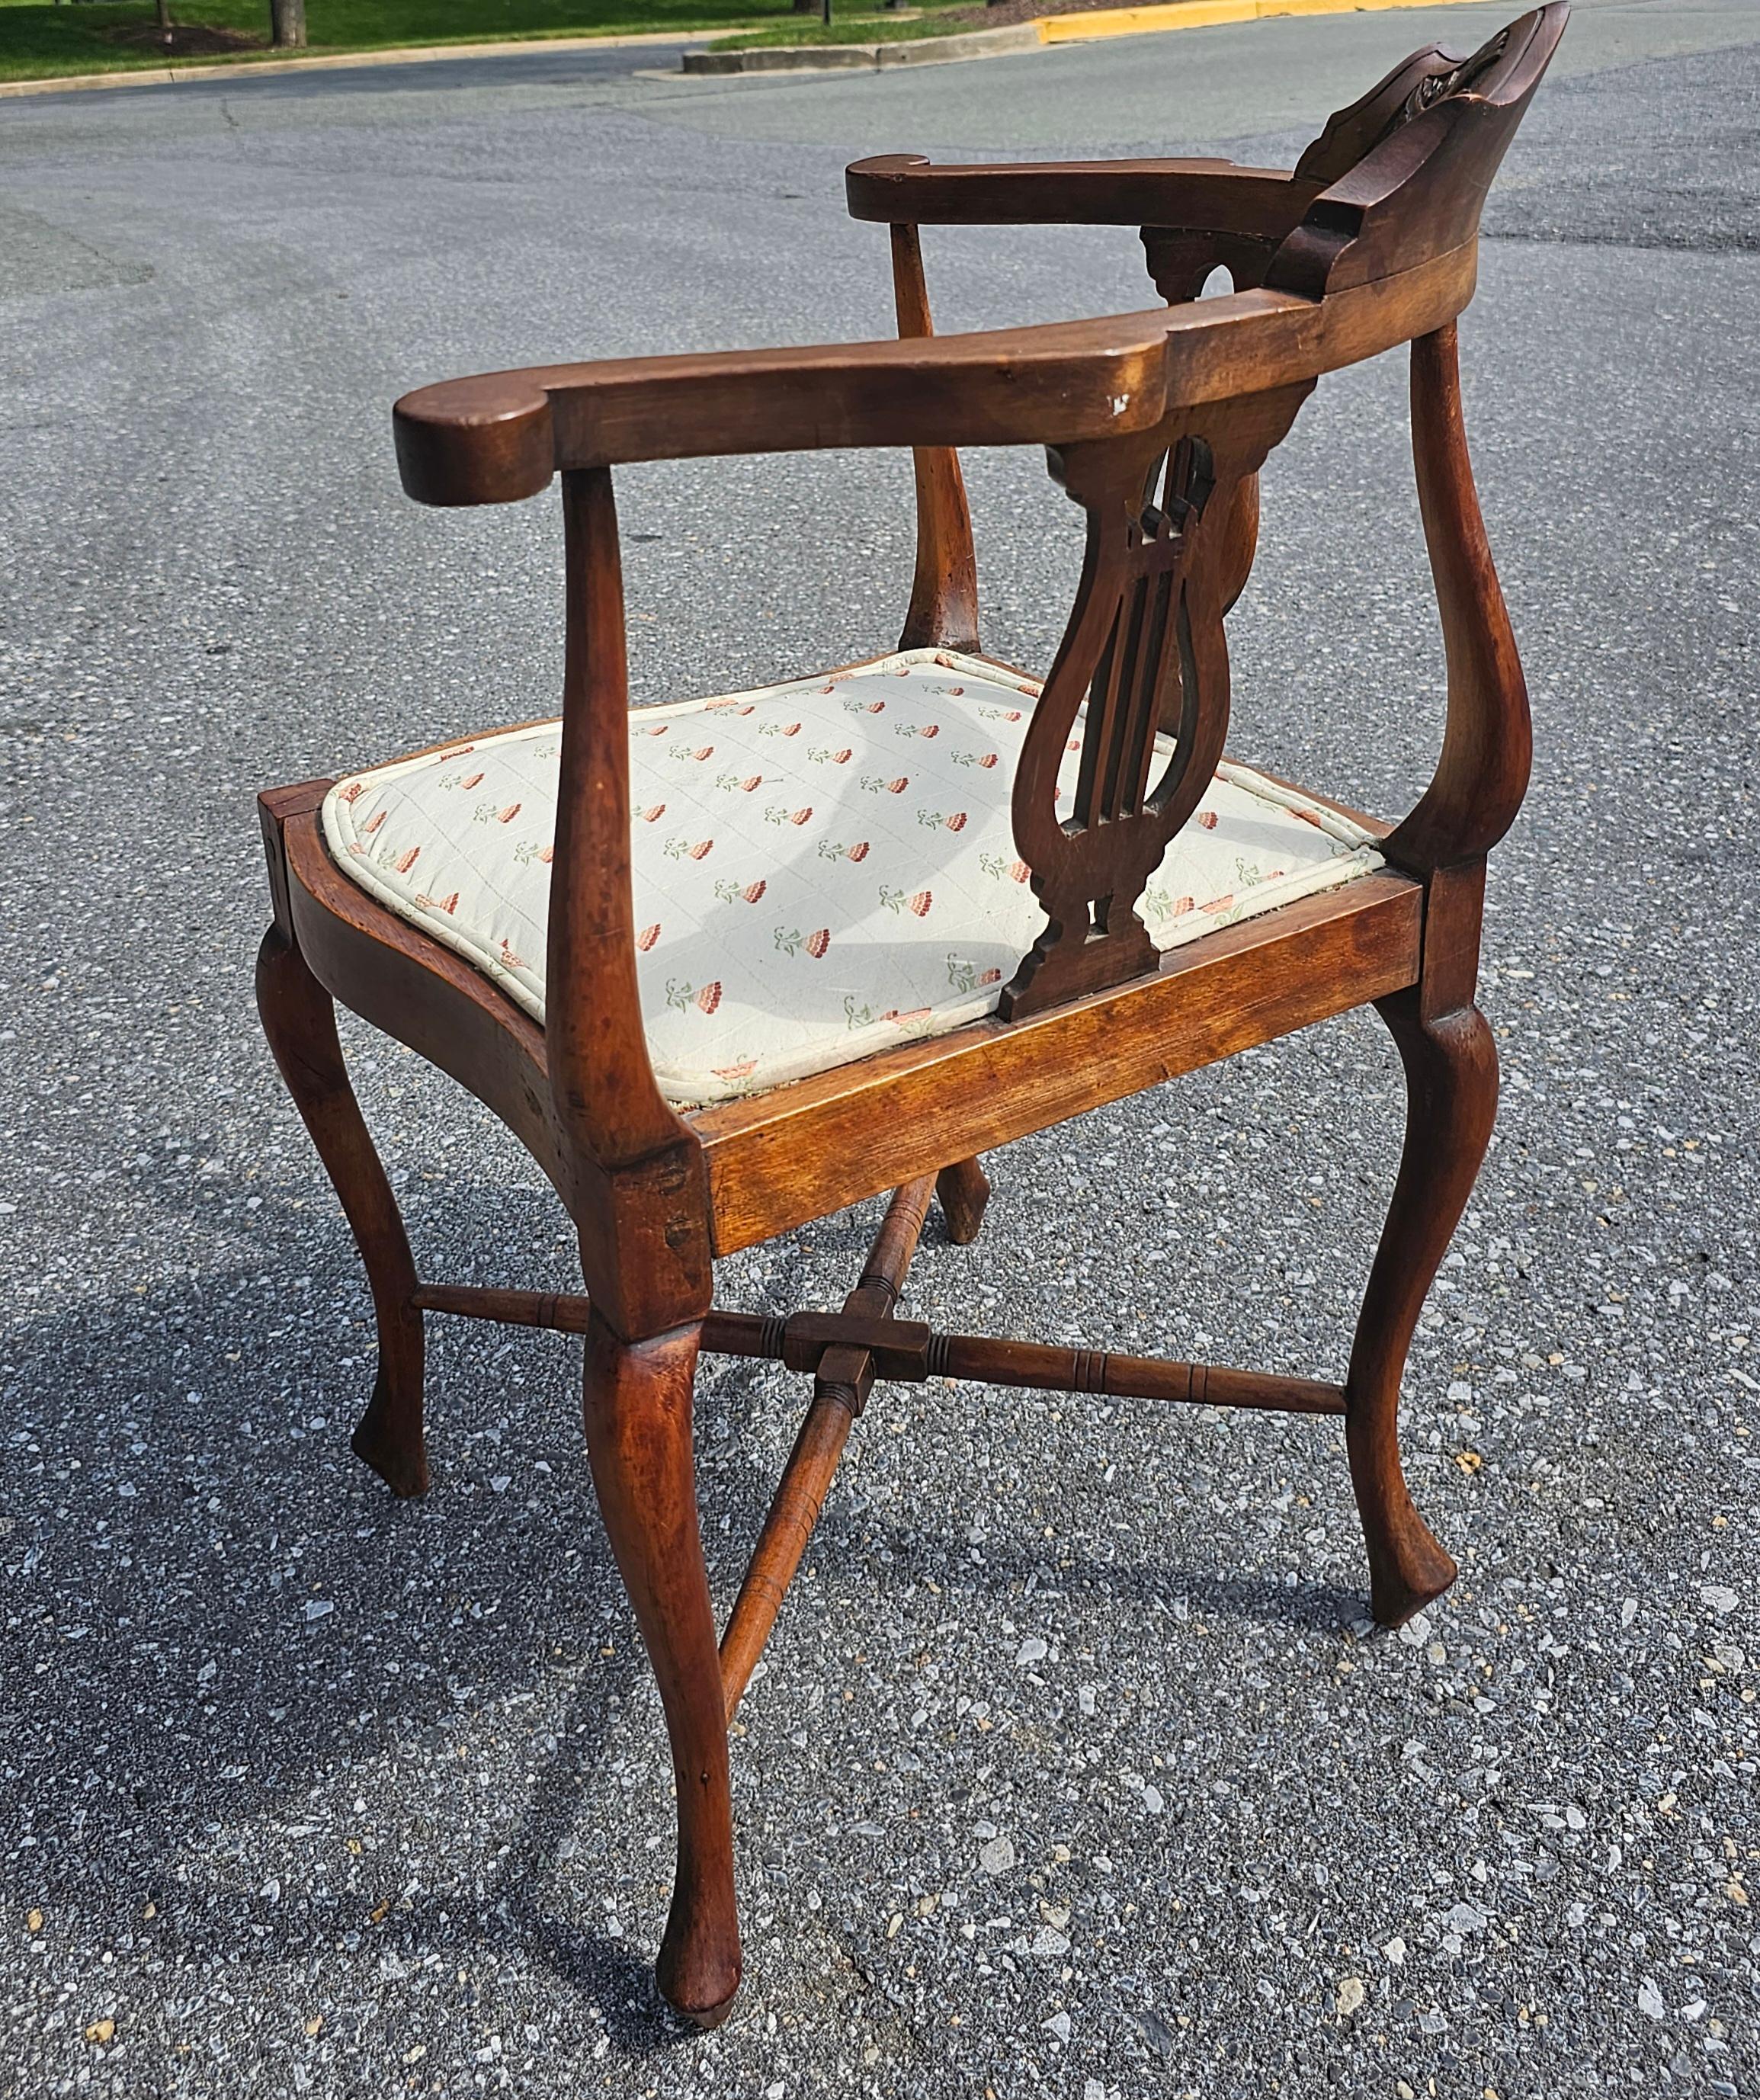 Victorian Carved Walnut Upholstered Seat Corner Chair In Good Condition For Sale In Germantown, MD